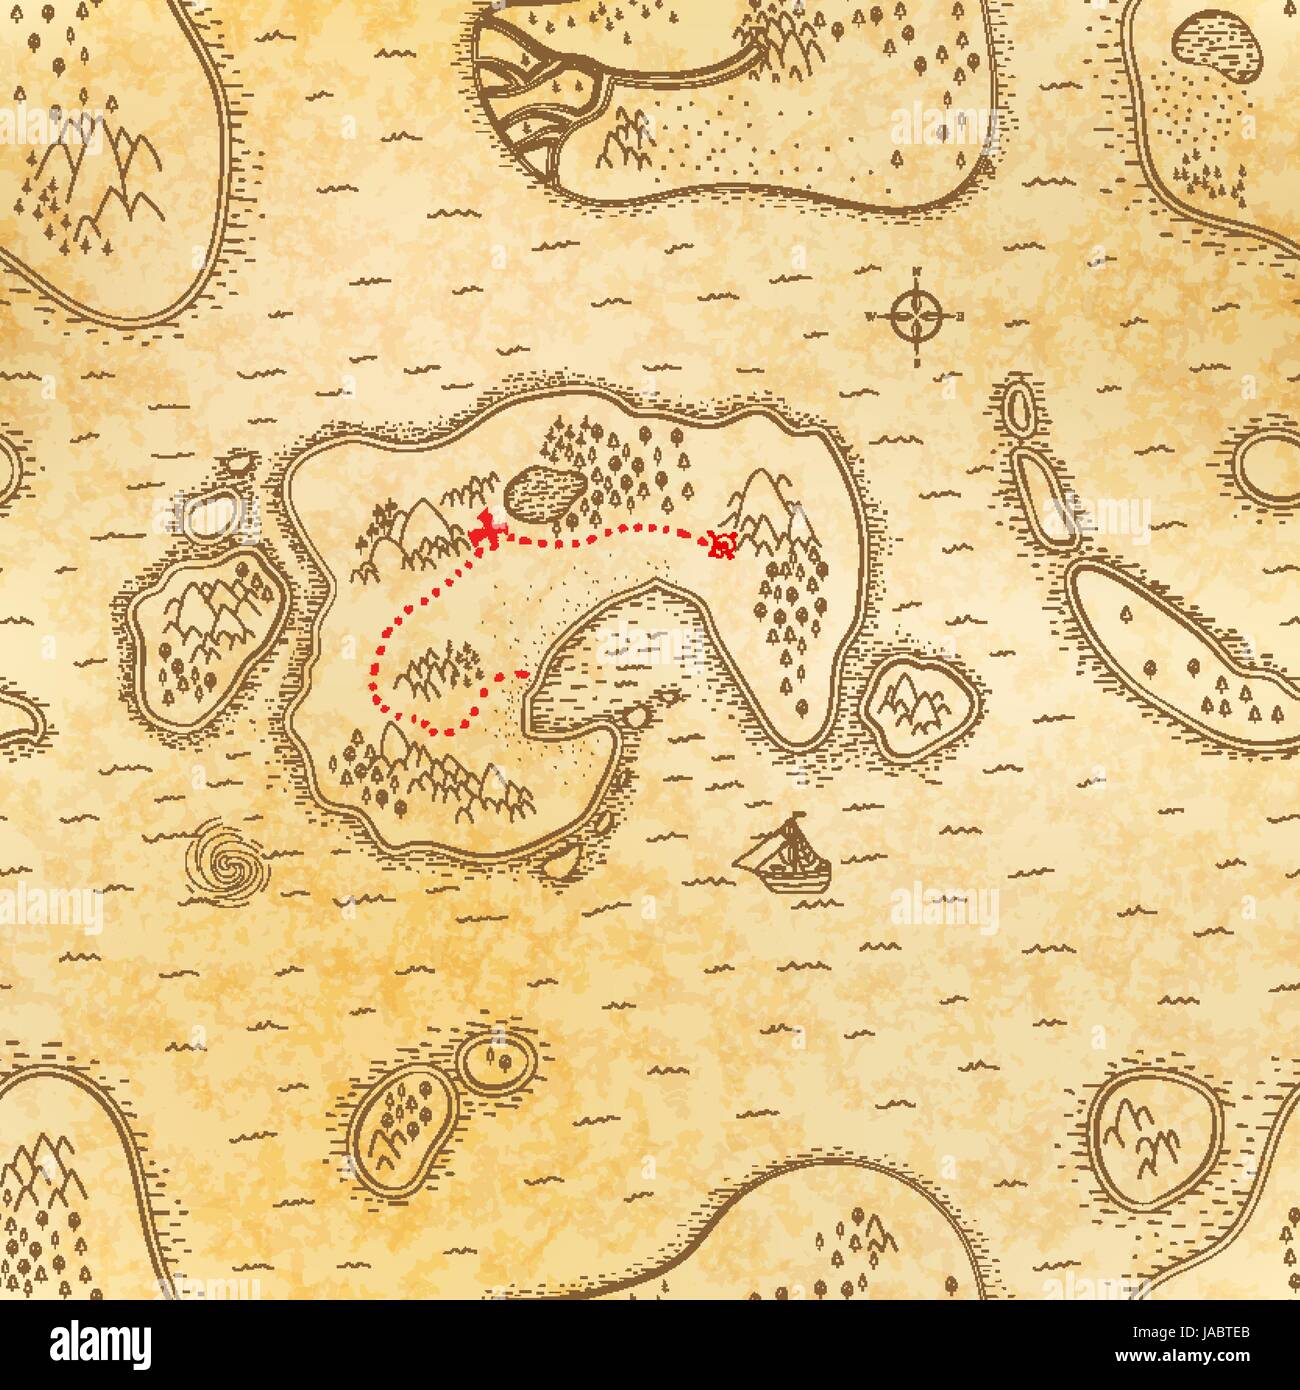 Ancient pirate map on old textured paper with red path to treasure, seamless pattern Stock Vector